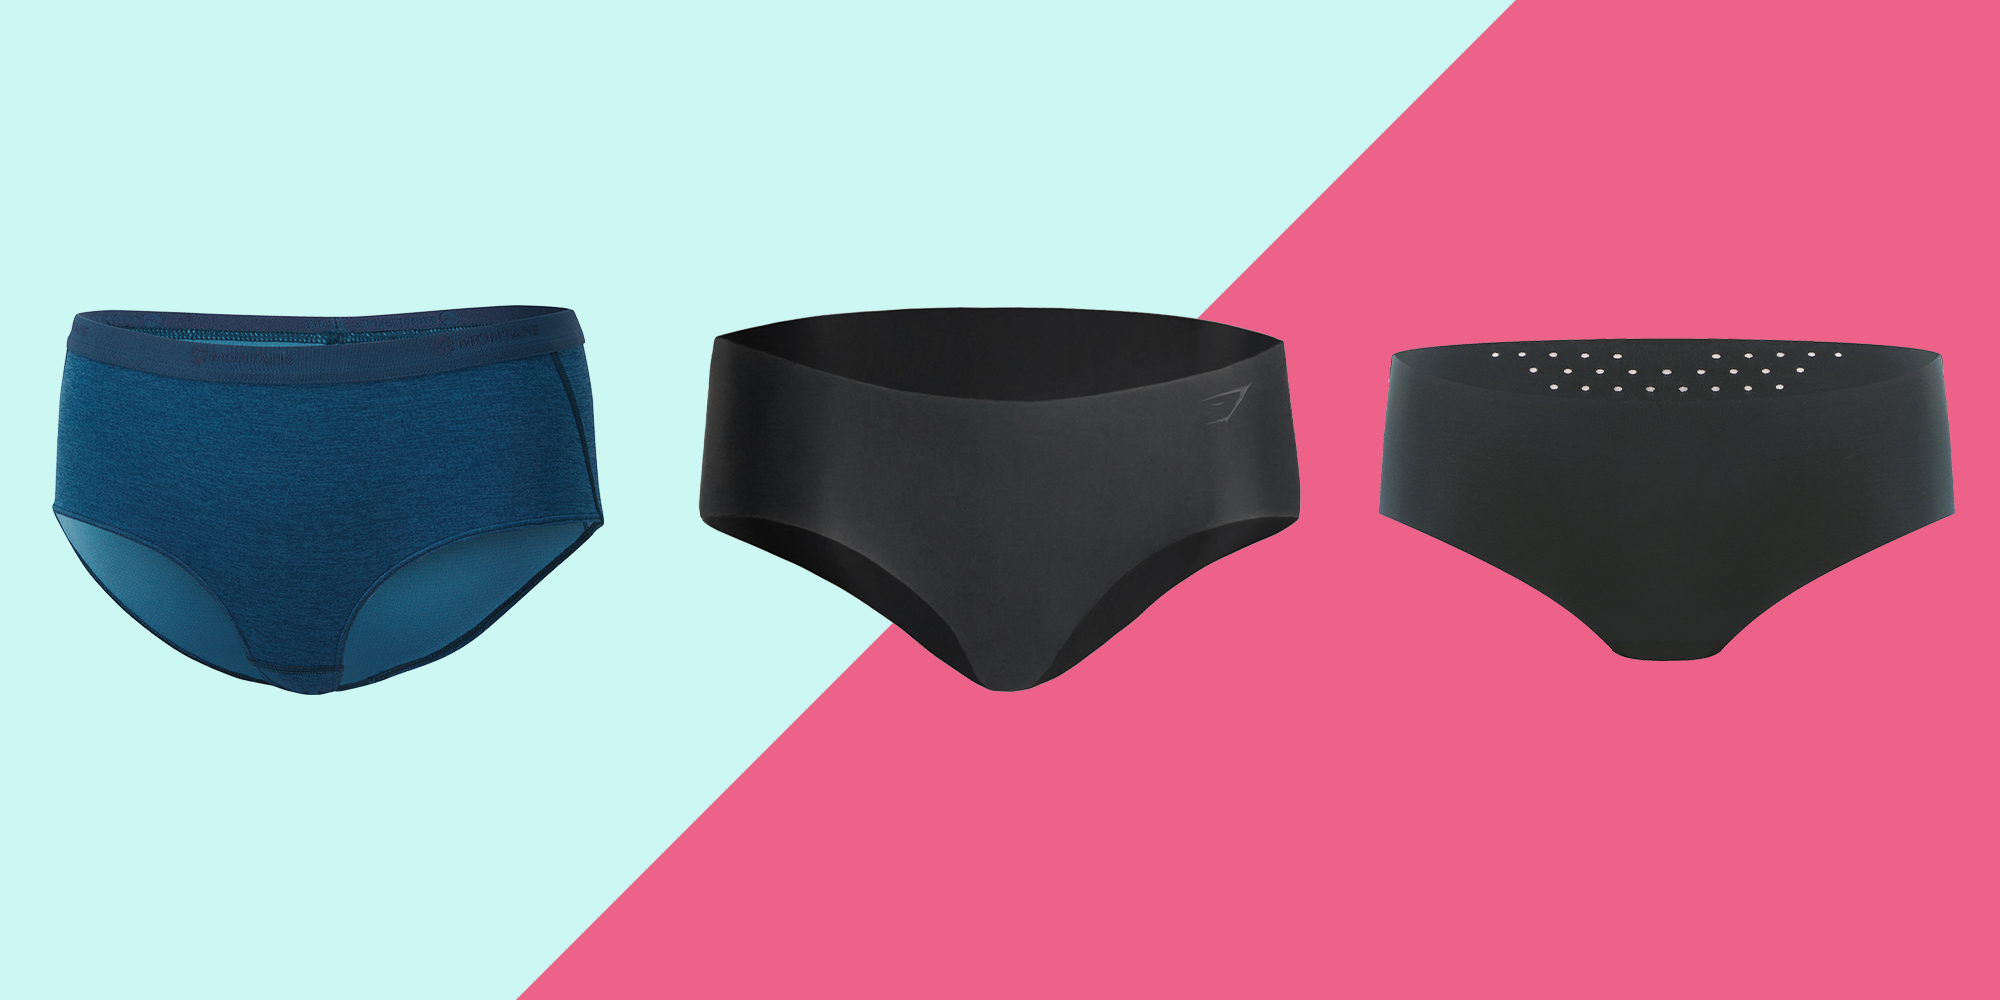 I'm An Underwear Expert, and the World's Best Underwear Is 30% Off Today -  Yahoo Sports